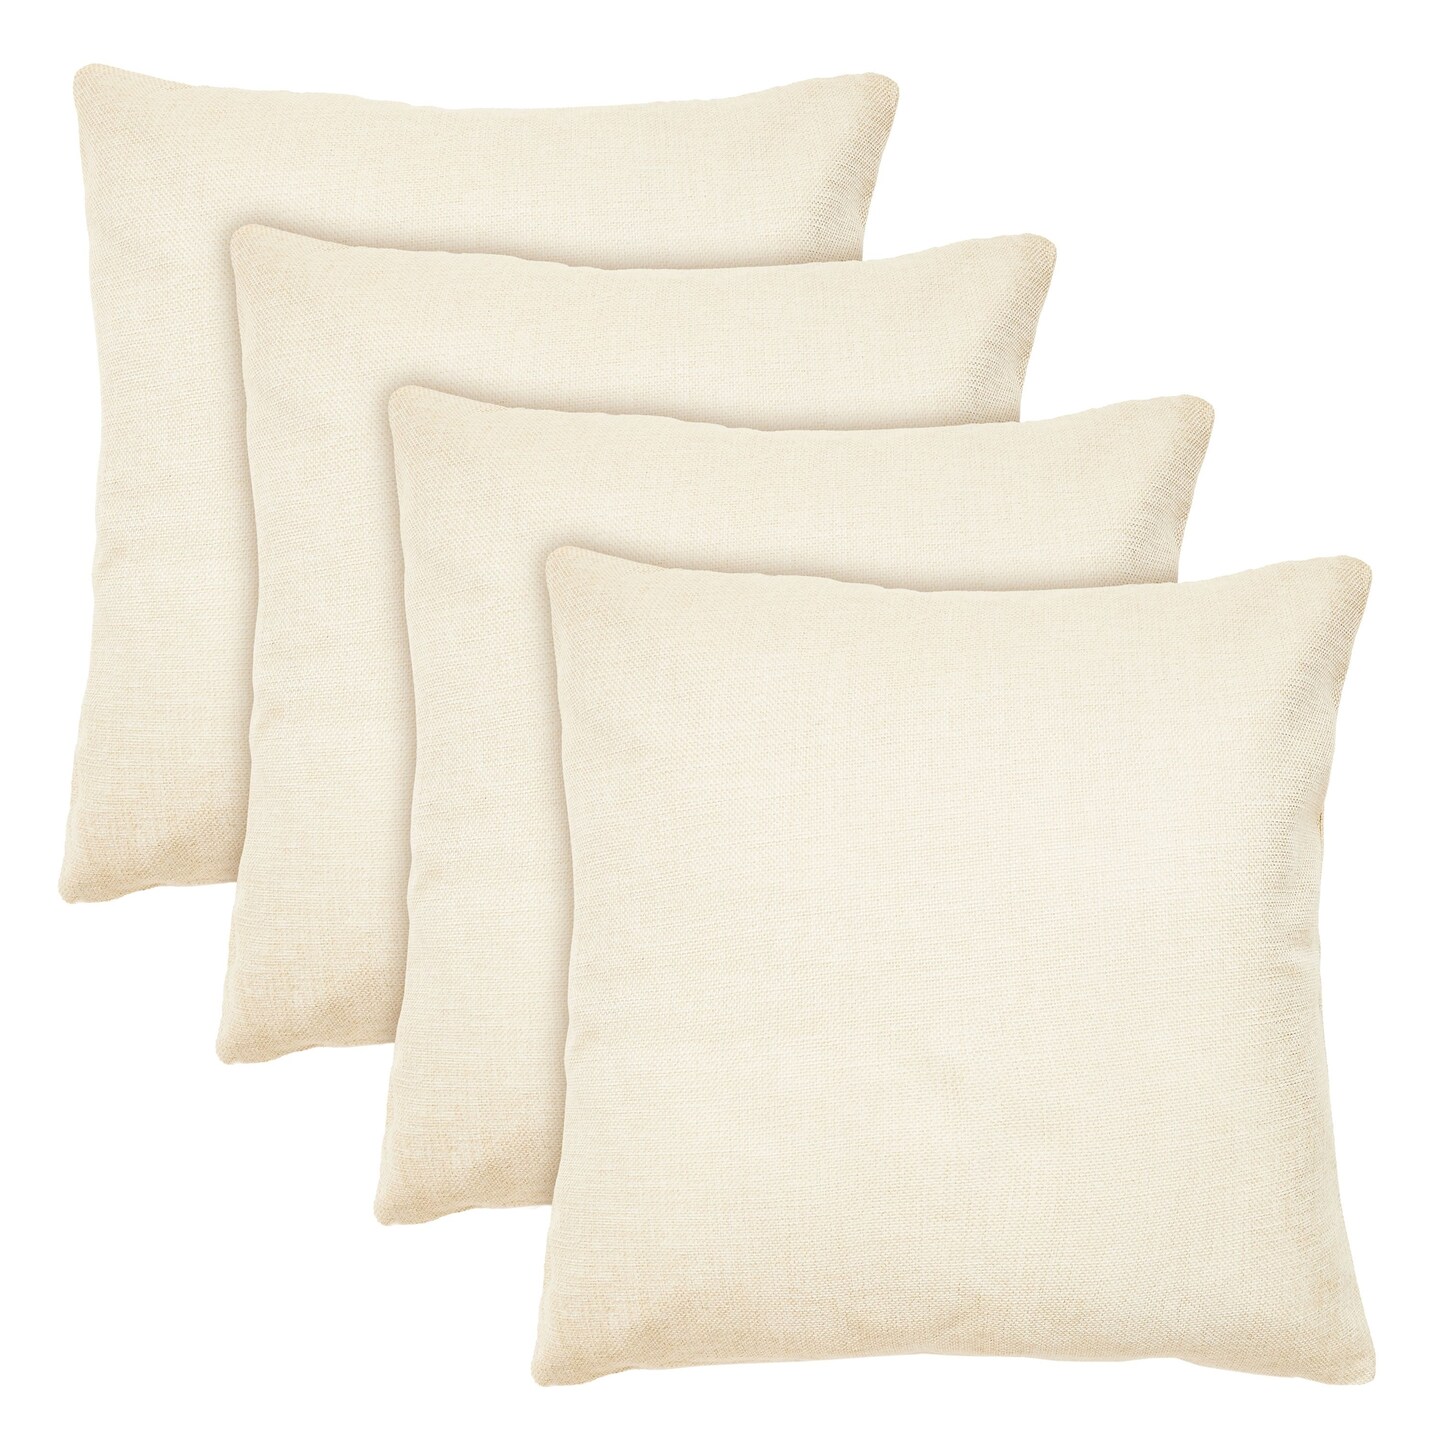 Set of 4 Blank Canvas 17x17 Throw Pillow Covers to Decorate, Plain Cases  for DIY Crafts, Living Room, Modern Home Decor